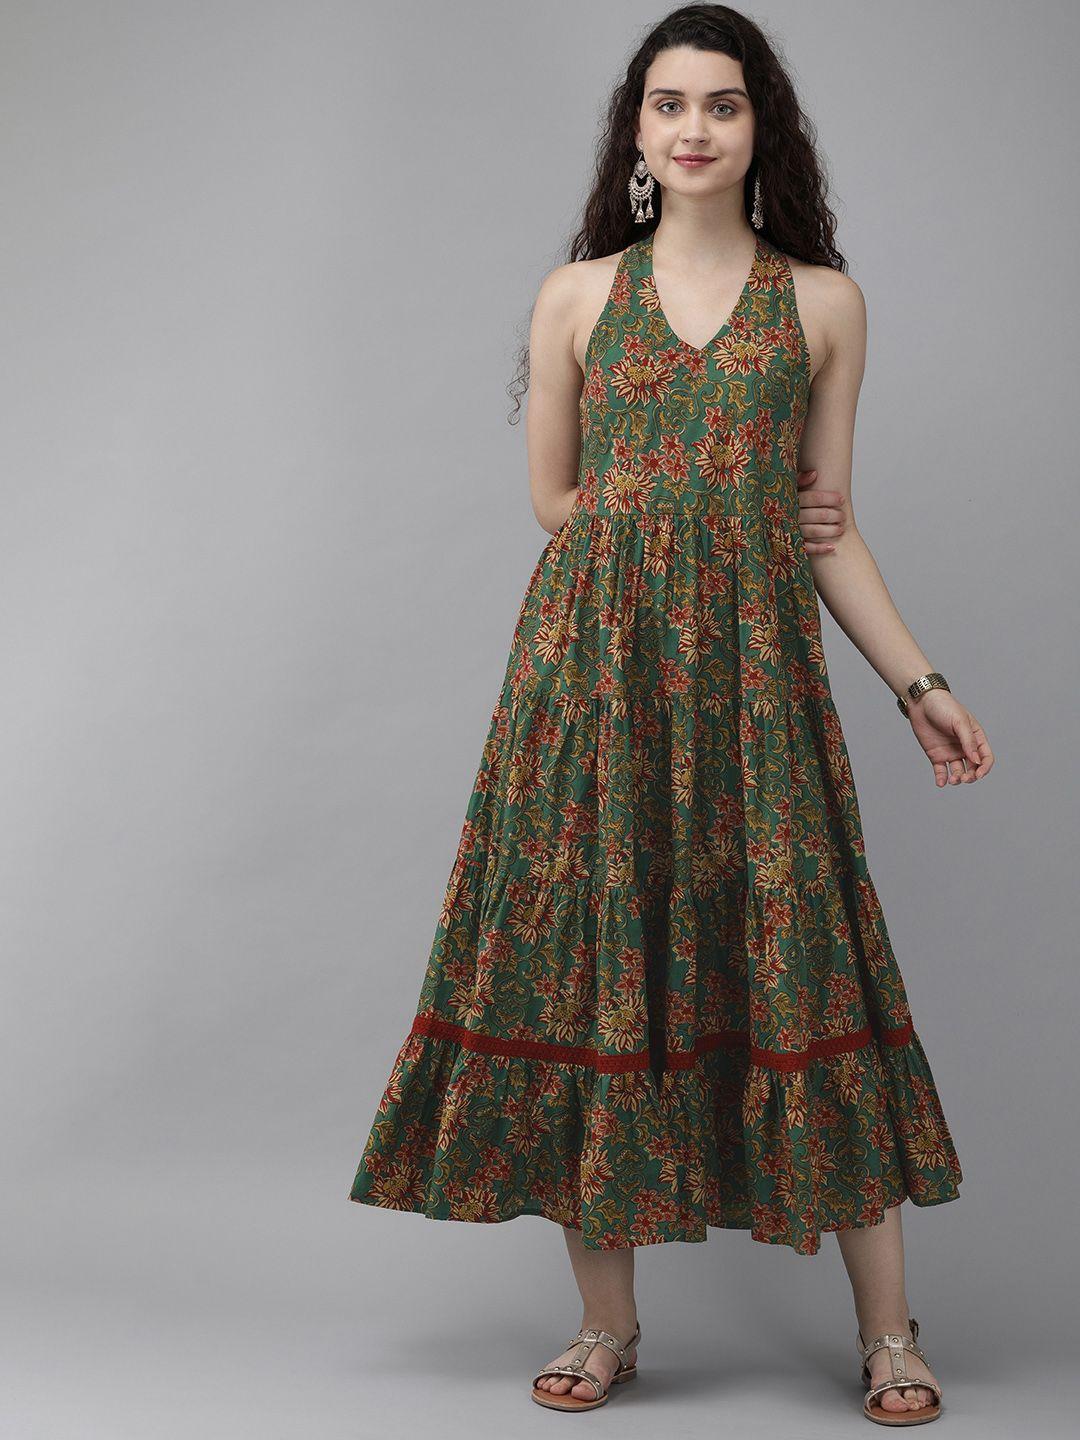 rain & rainbow women green & maroon floral printed tiered fit and flare dress